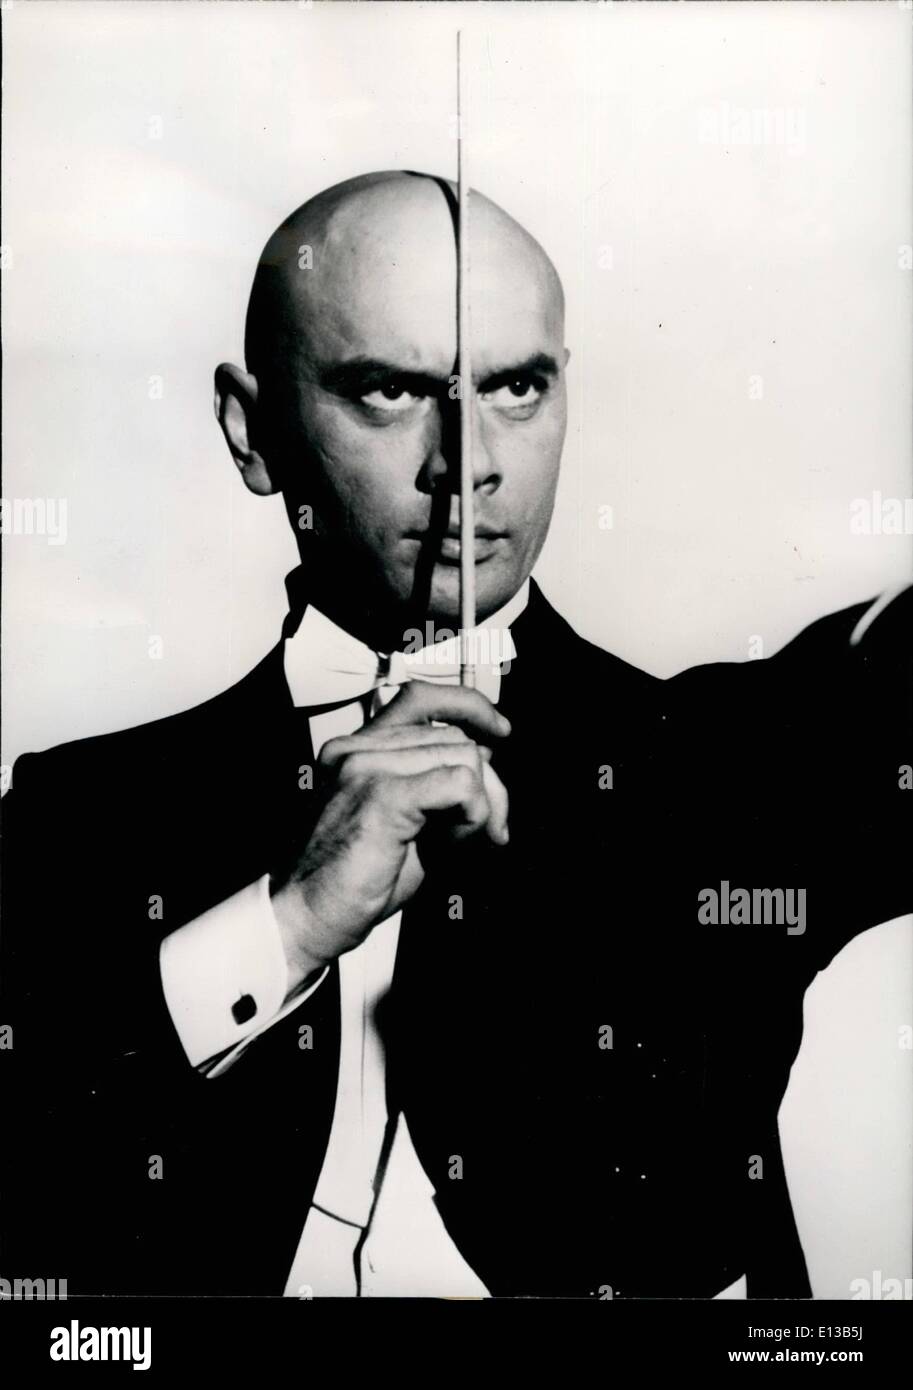 Feb. 29, 2012 - Yul Brynner as a Conductor: The Famous American Actor, Yul Brynner is in Paris now for the Filming of ''Once mre with Feeling'', produced and directed by Stanley Donen. In this Film, Yul Brynner plays the part of a famous conductor. Photo shows Yul Brynner in a scene of the film. Stock Photo